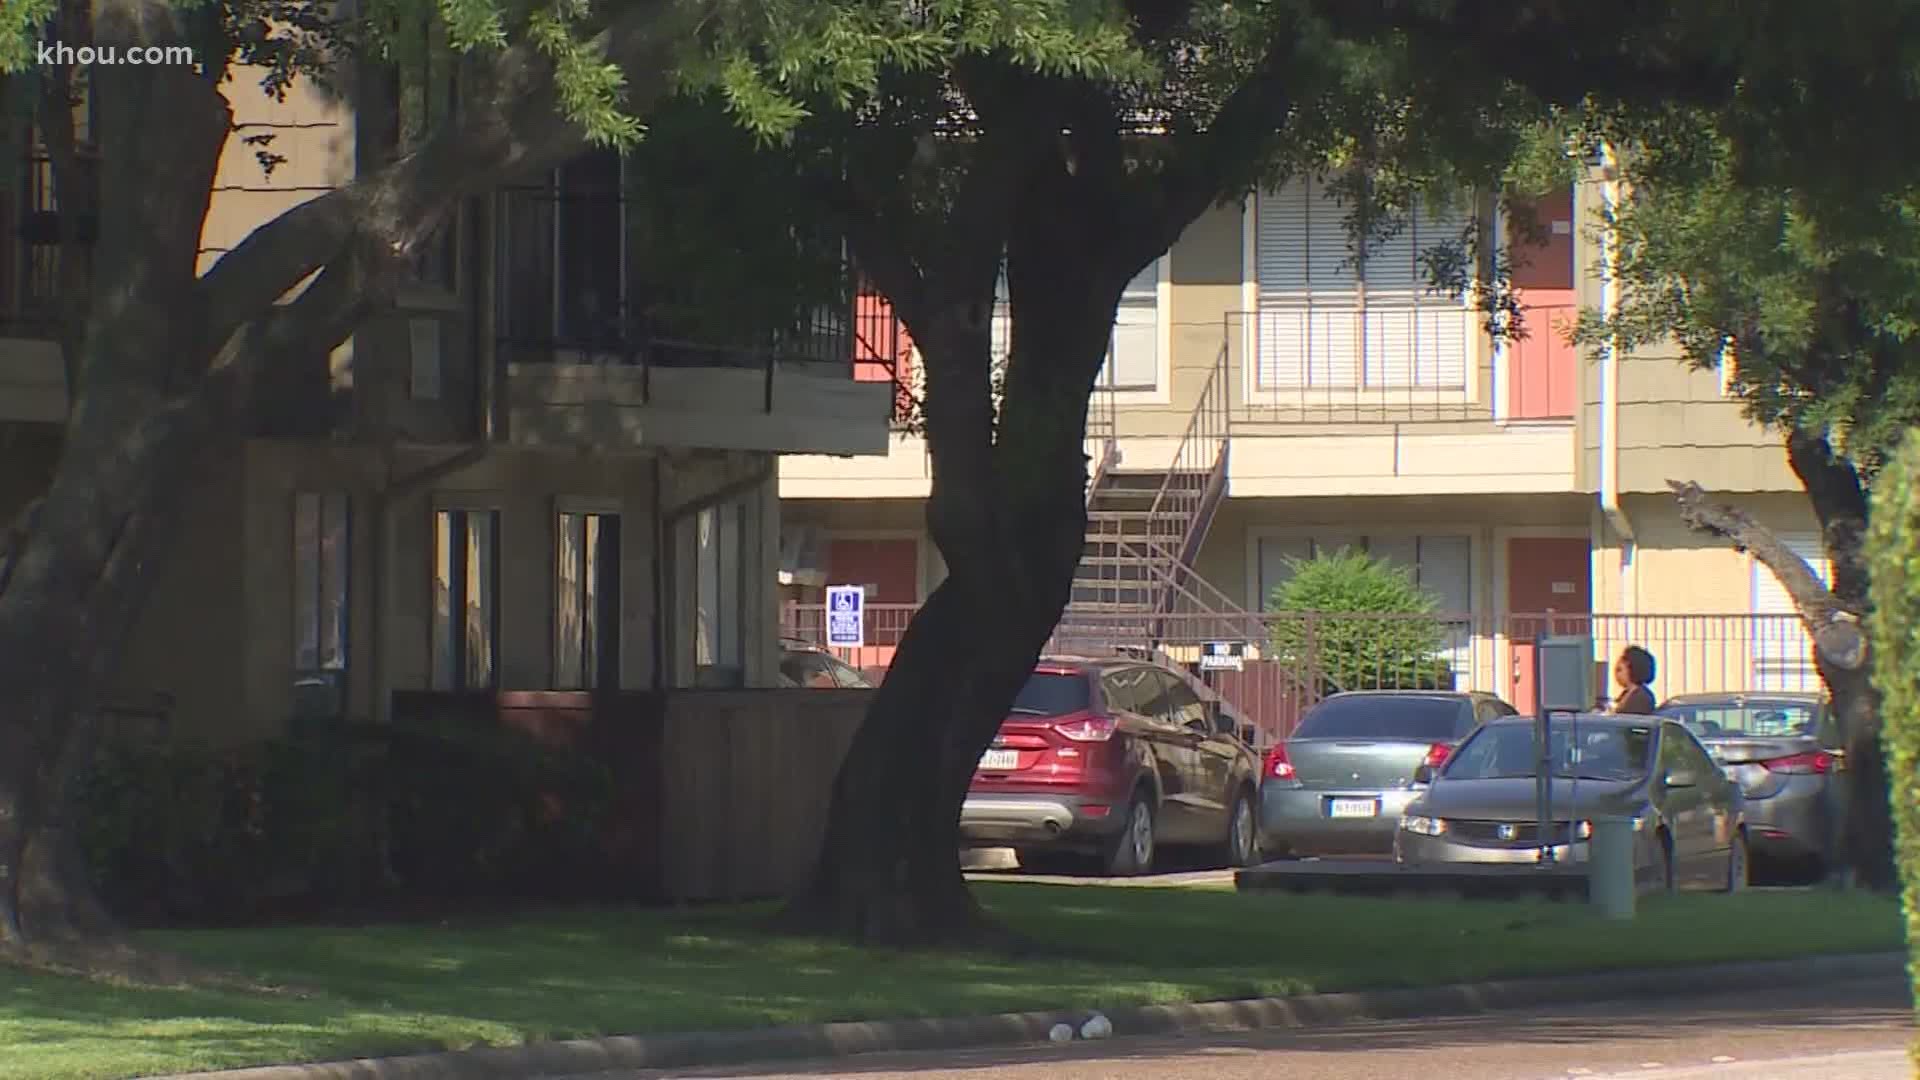 Some say as many as 40% of Houston renters will be evicted within the next few months.